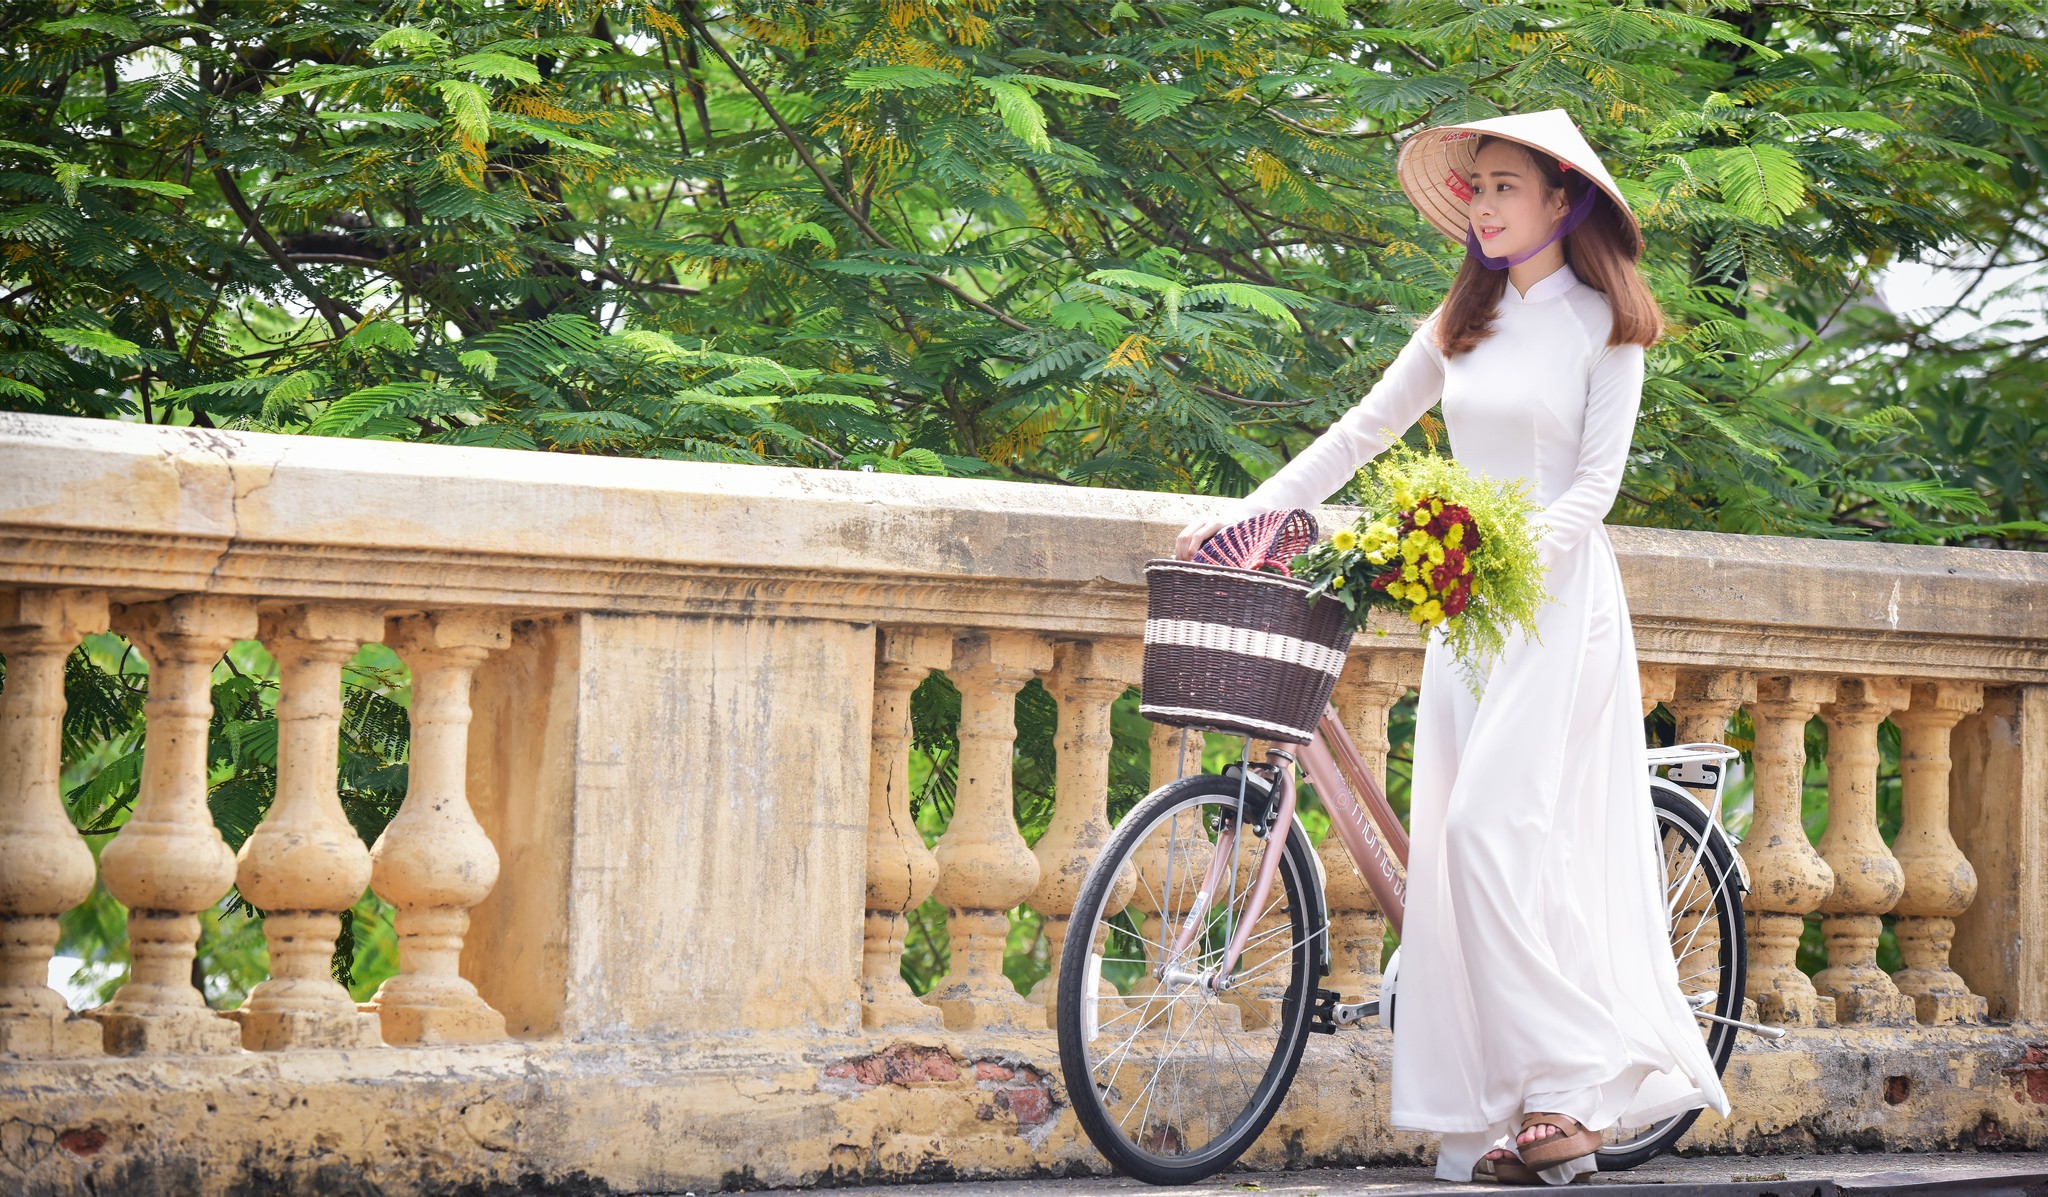 Women With Bicycles Women Flowers Model Women Outdoors Hat White Dress 2048x1197